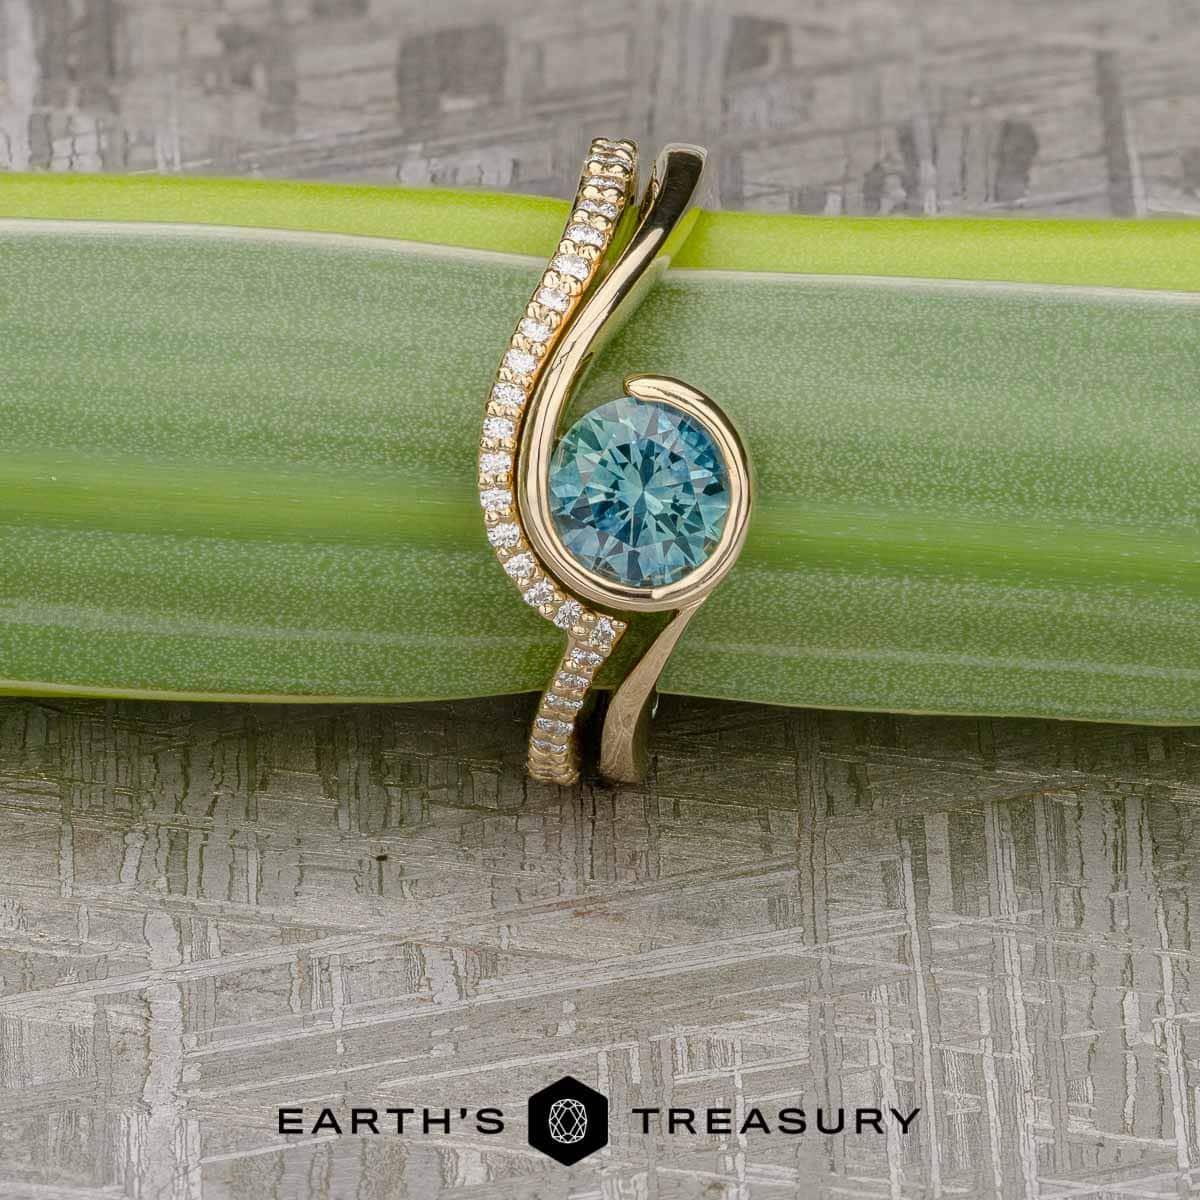 The "Calliste" Ring in 14k Yellow Gold with 1.13-Carat Montana Sapphire, alongside the "Calliste" band in 14k yellow gold